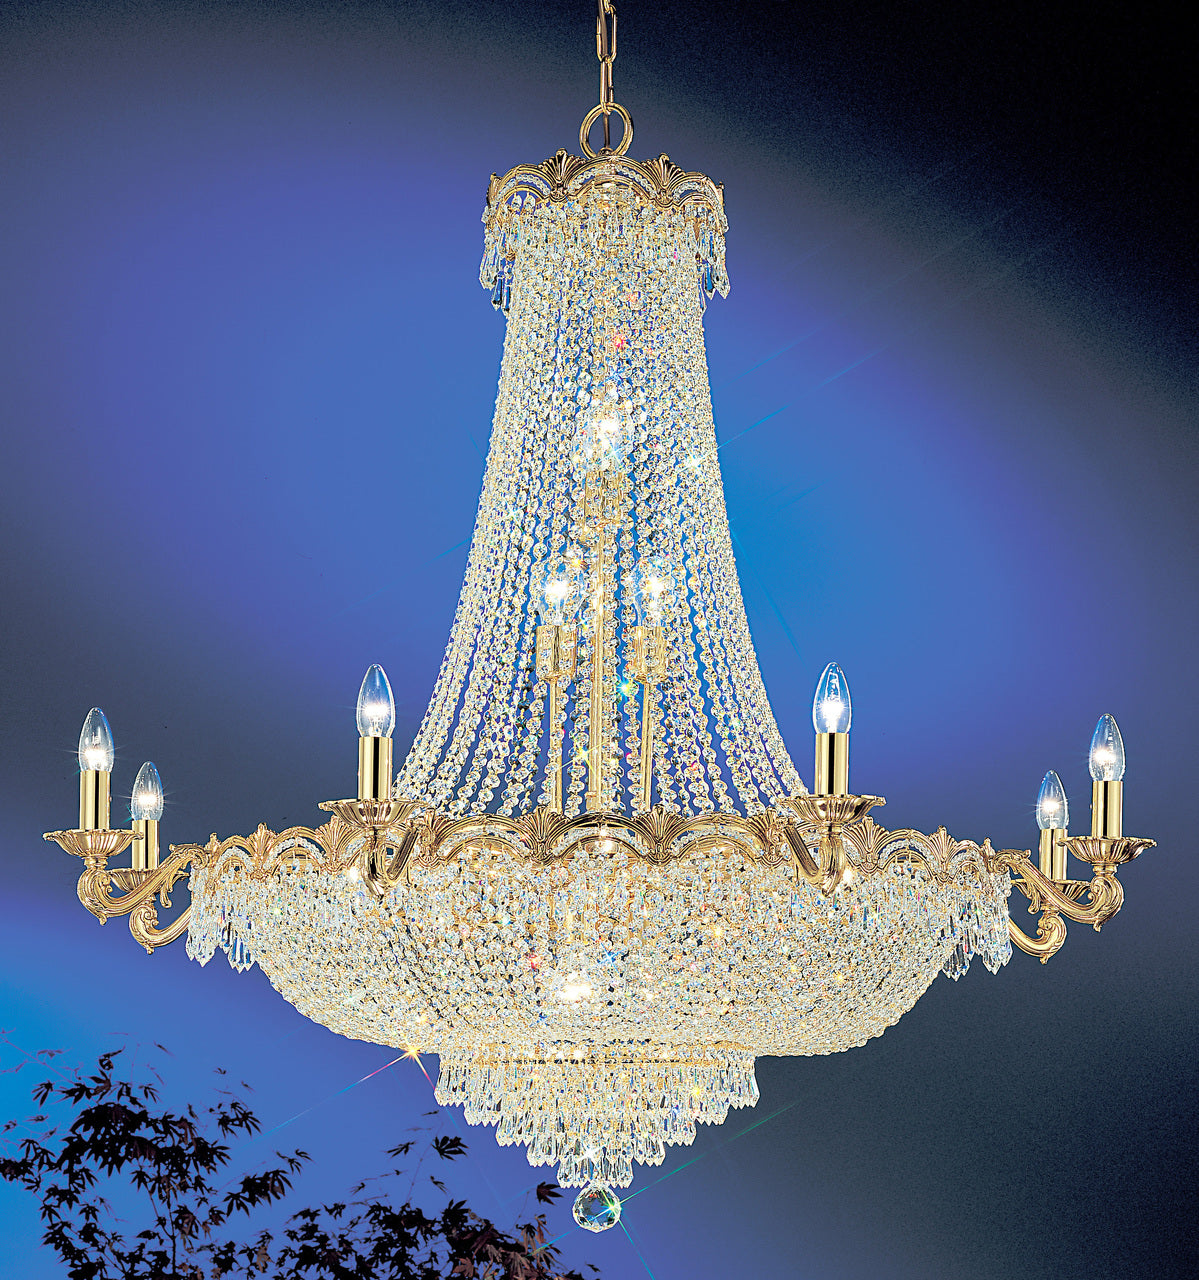 Classic Lighting 1860 G SGT Regency II Crystal Chandelier in 24k Gold (Imported from Spain)